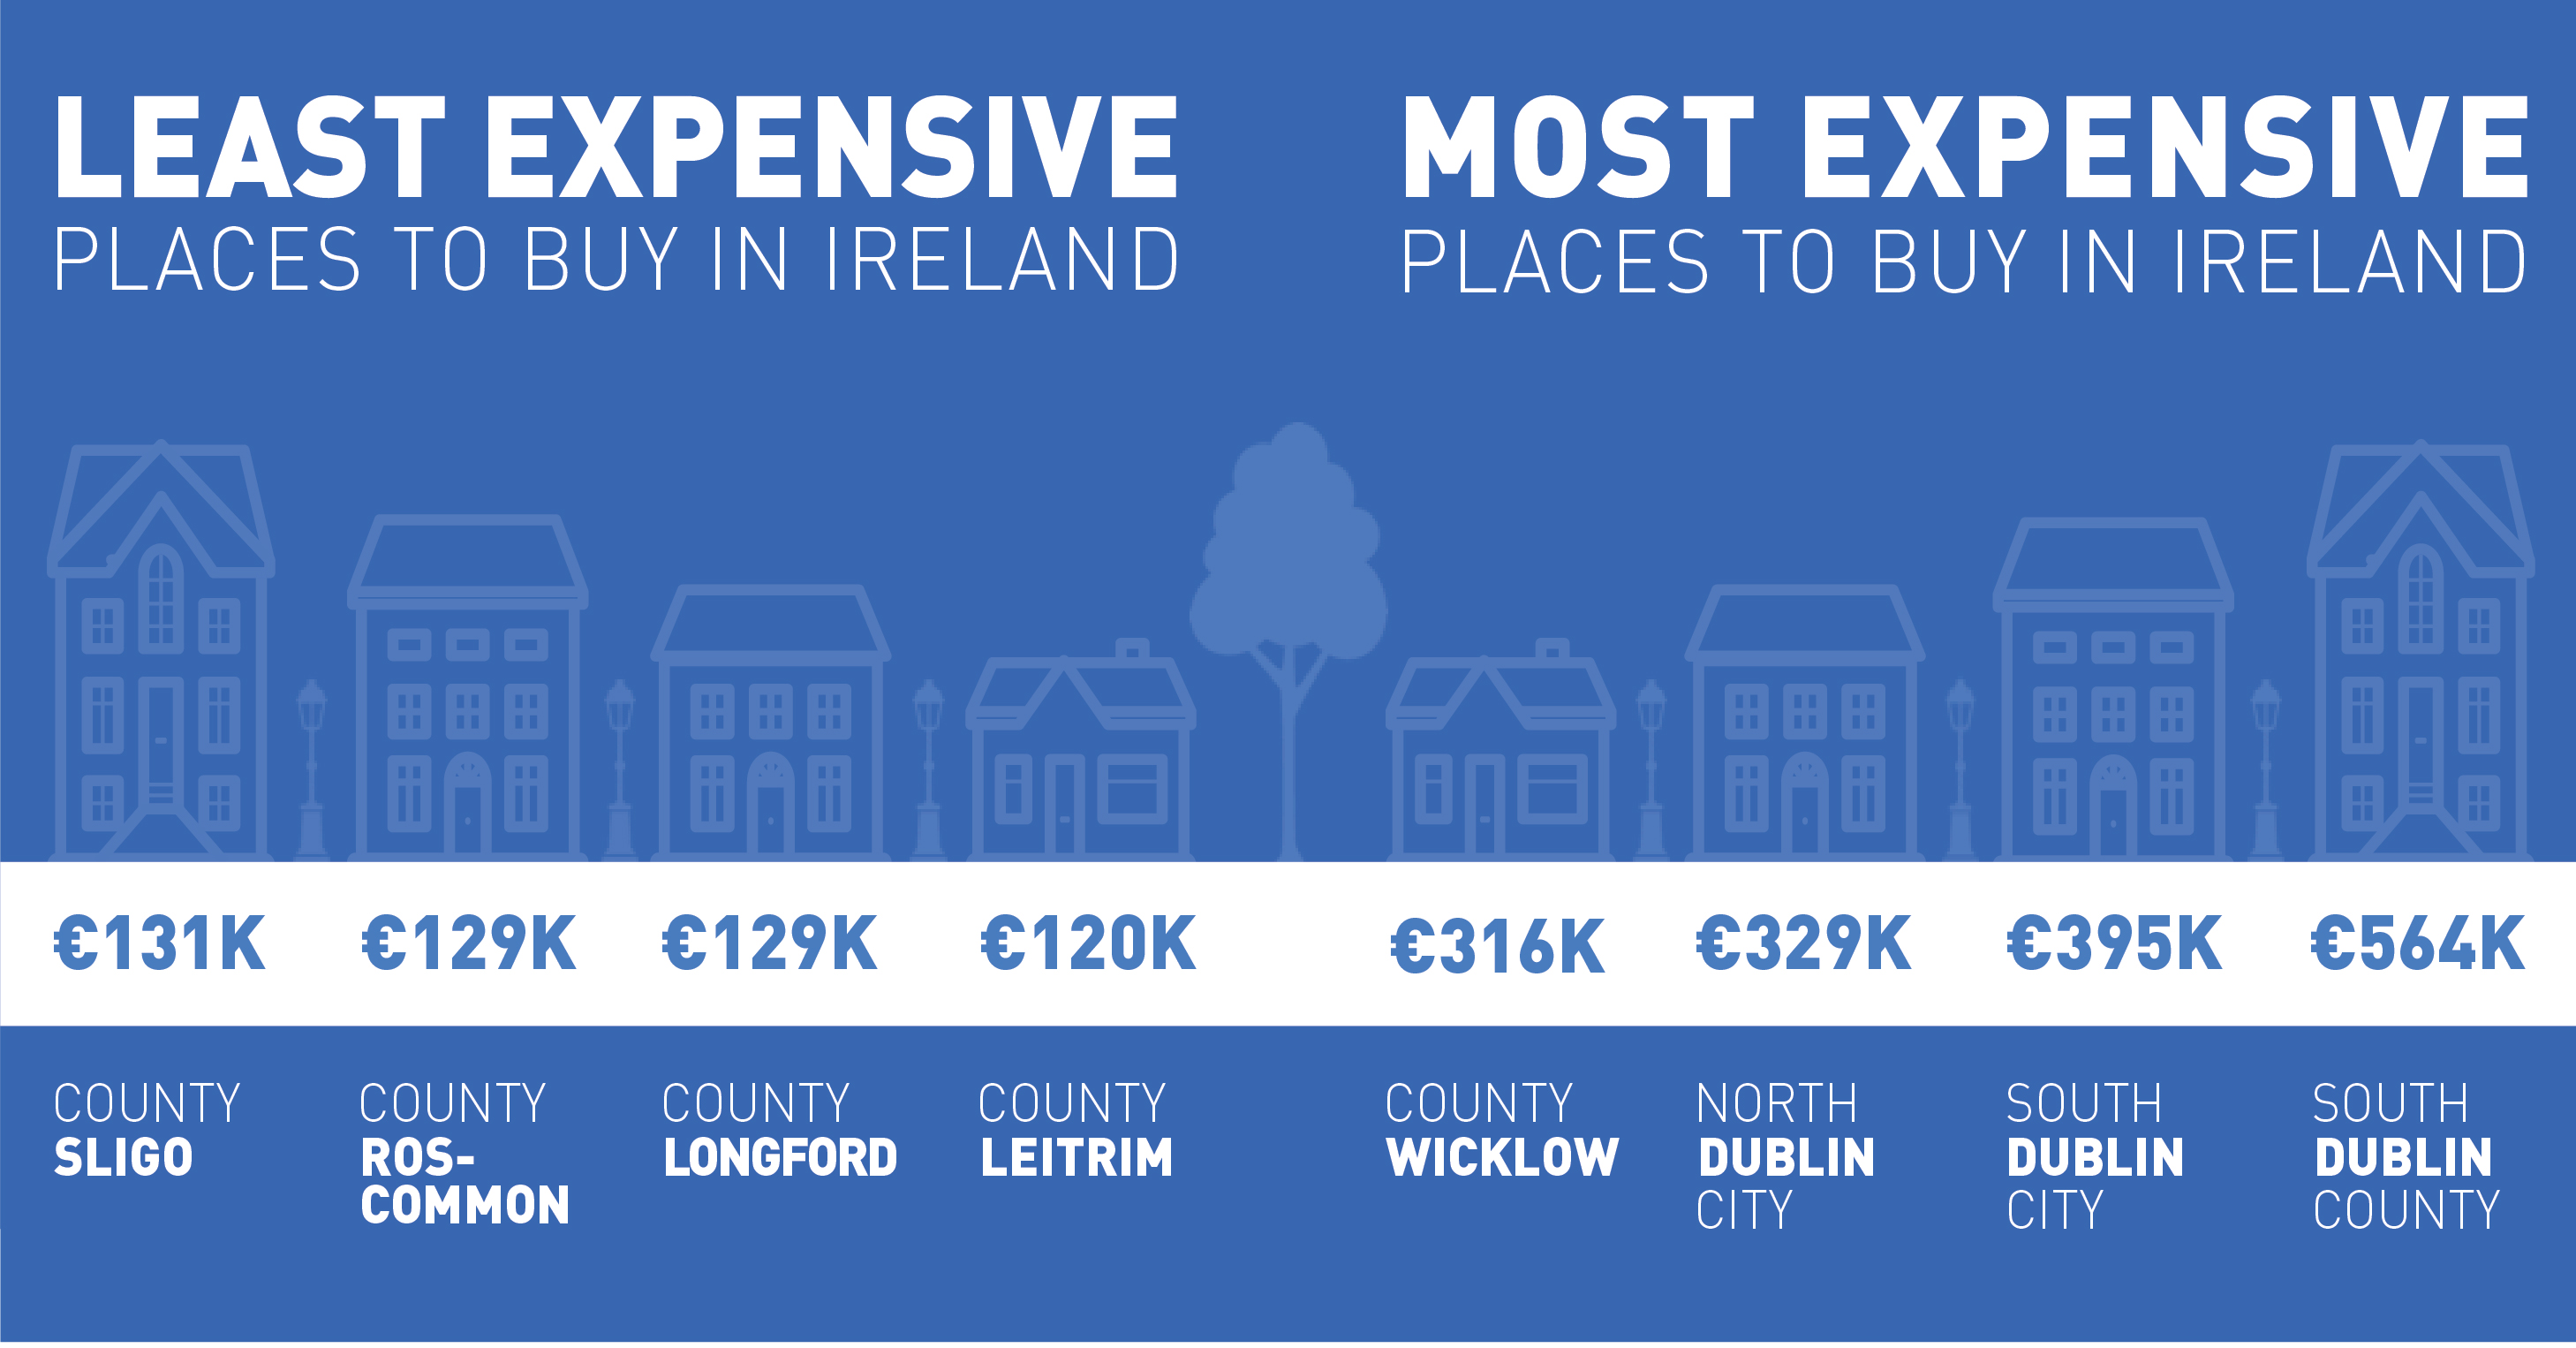 Least and most expensive places to buy in Ireland